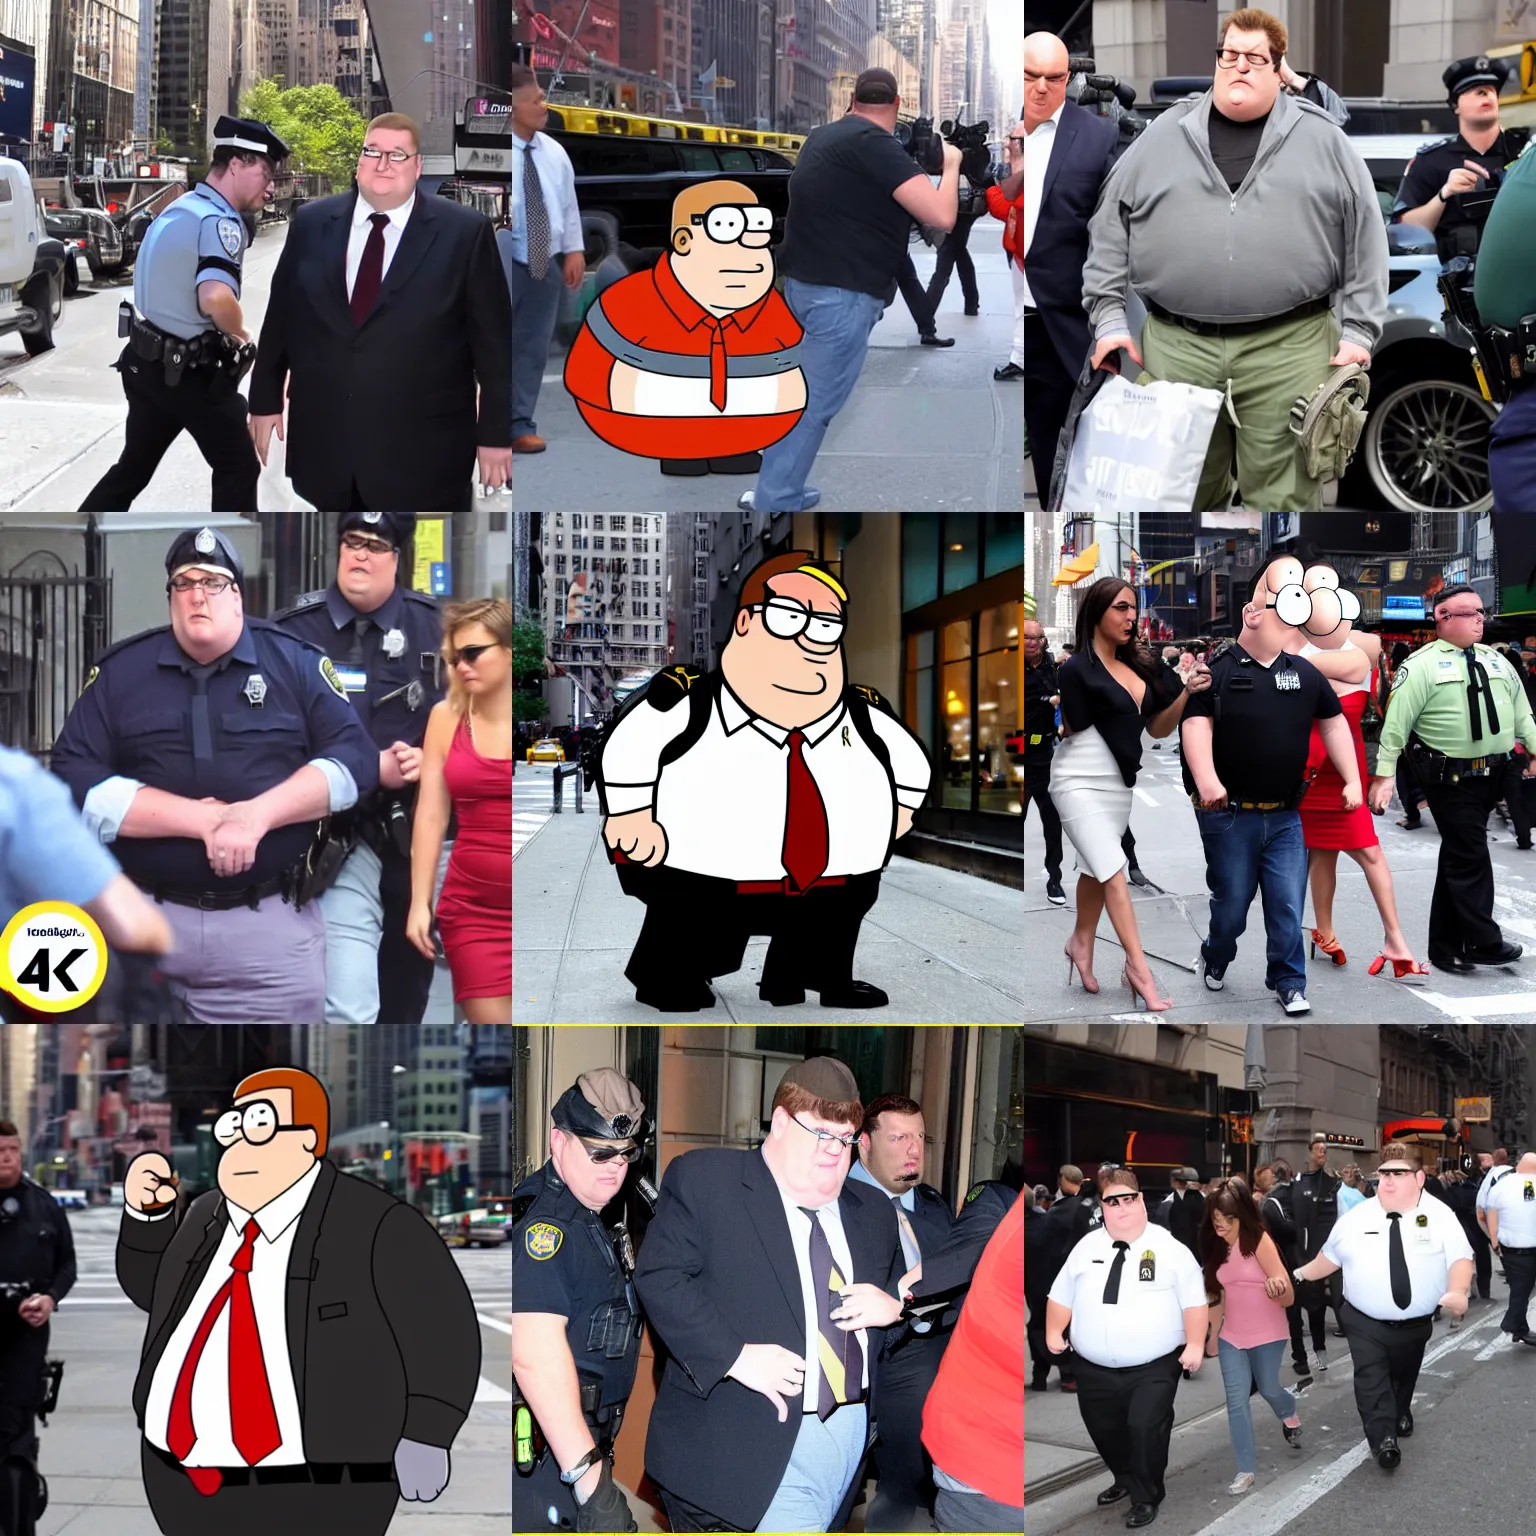 Prompt: Peter Griffin arrested real image paparazzi 4k new york